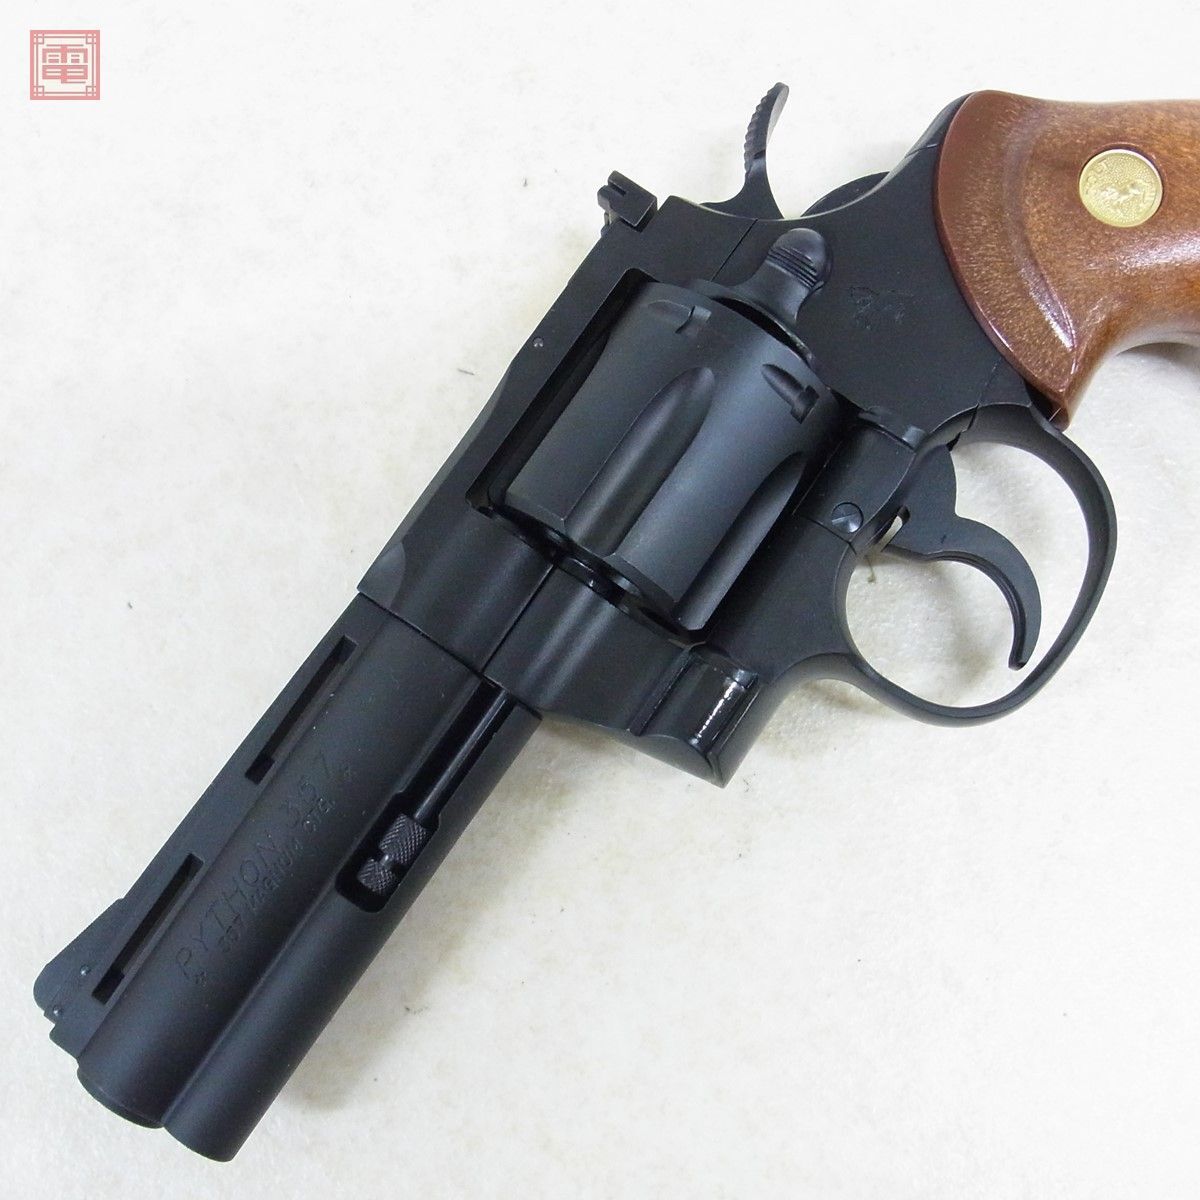 tanaka gas revolver Colt python 4 -inch HW heavy weight toR-model present condition goods [20